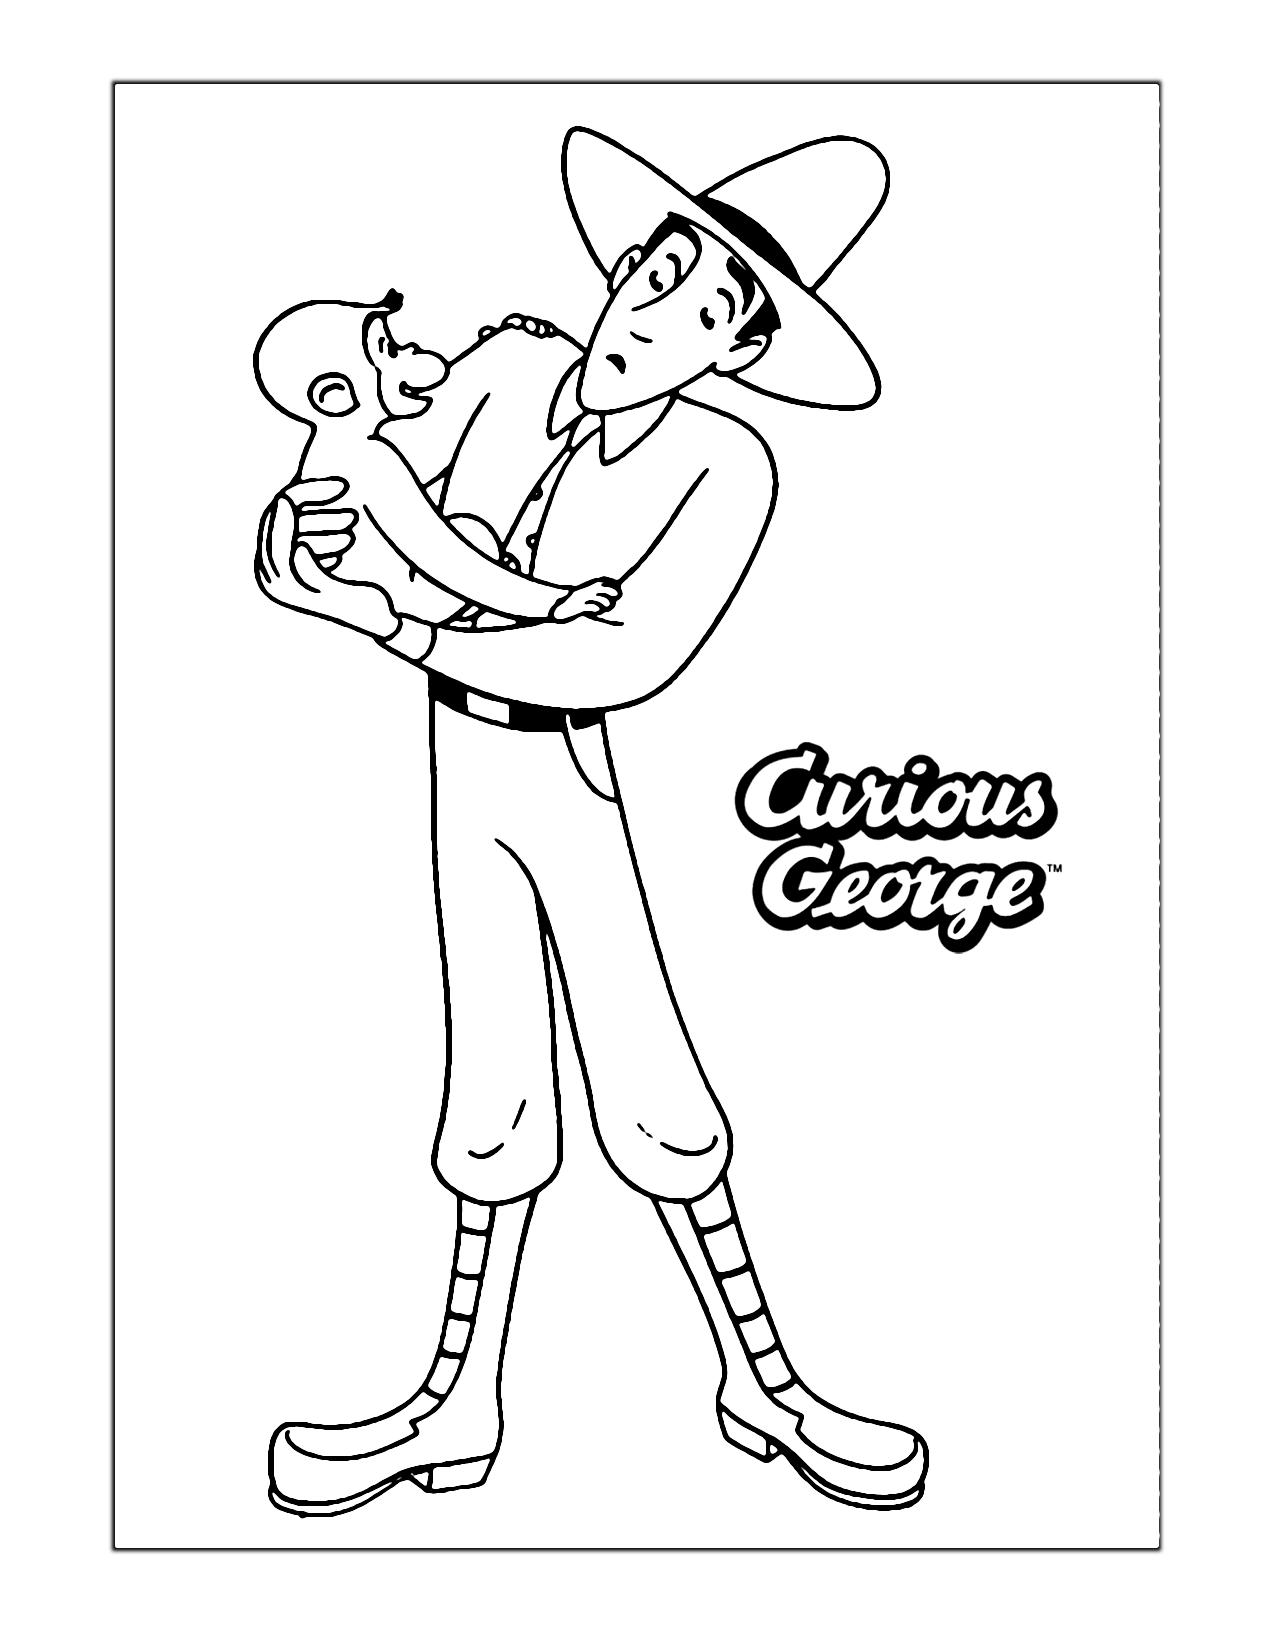 Curious George And The Man With The Yellow Hat Coloring Page